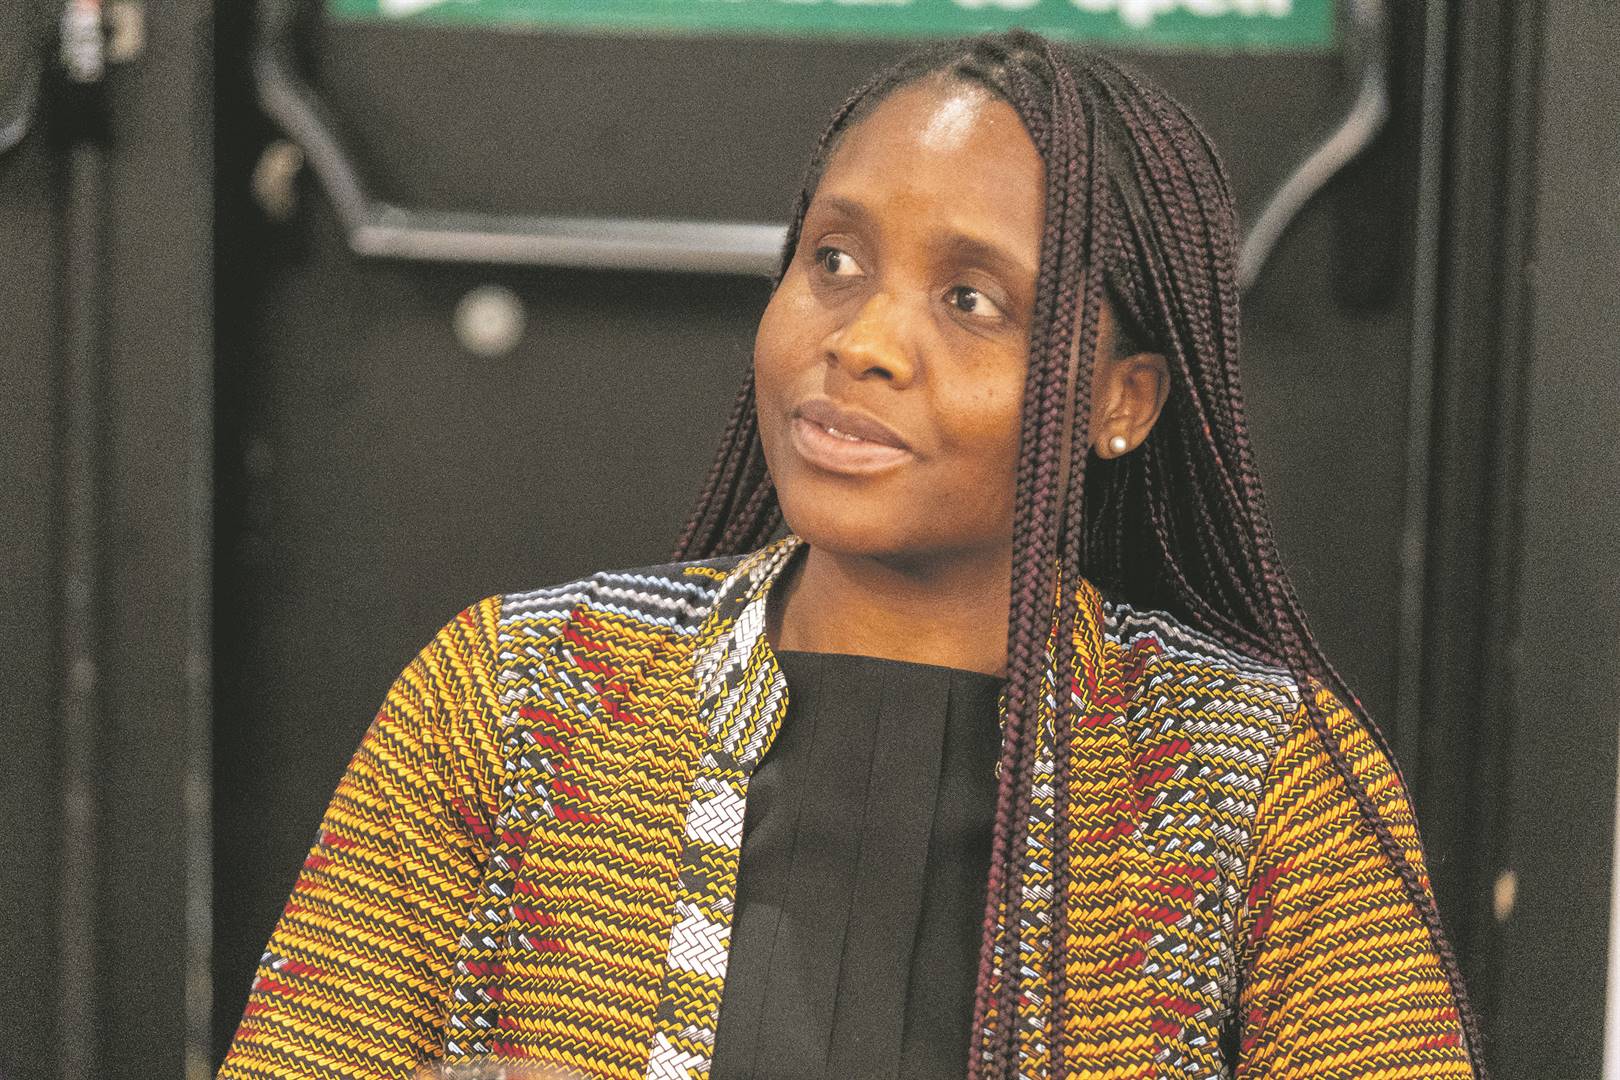 Safa CEO Lydia Monyepao has already hinted that she would quit if her decisions were vetoed.